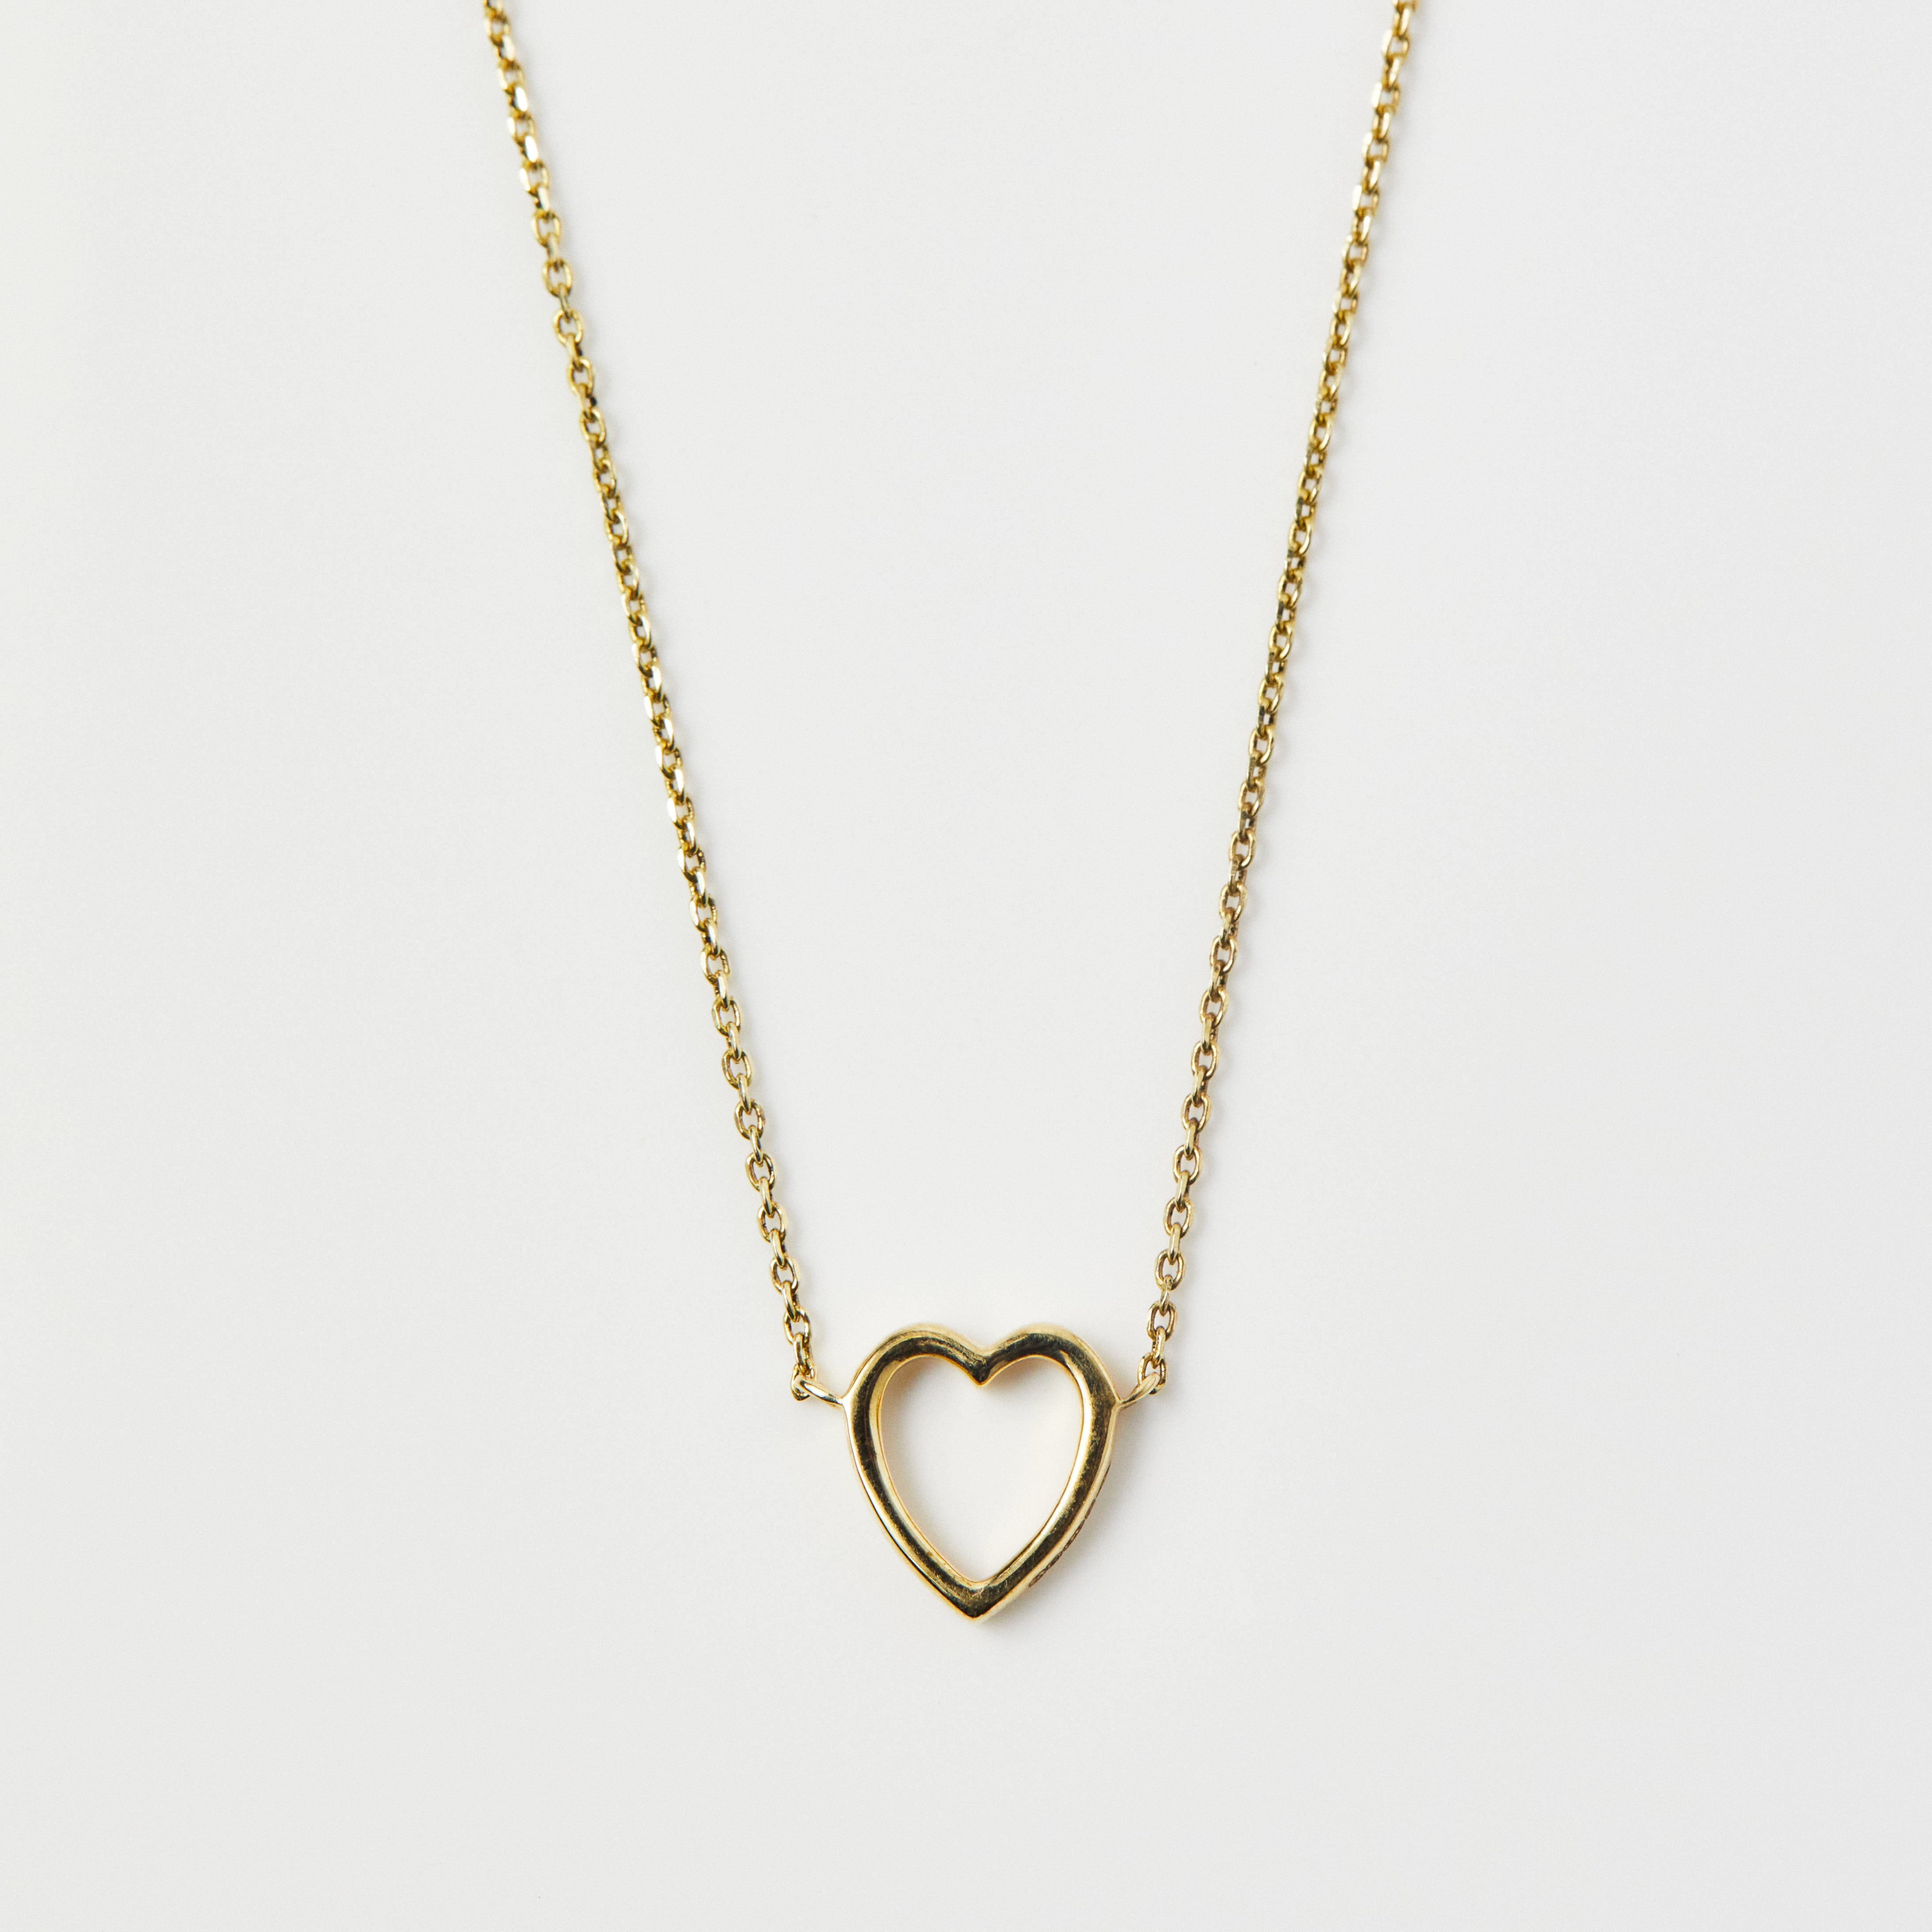 Heart Necklace In 9k Solid Gold - Necklace - Carrie Elizabeth